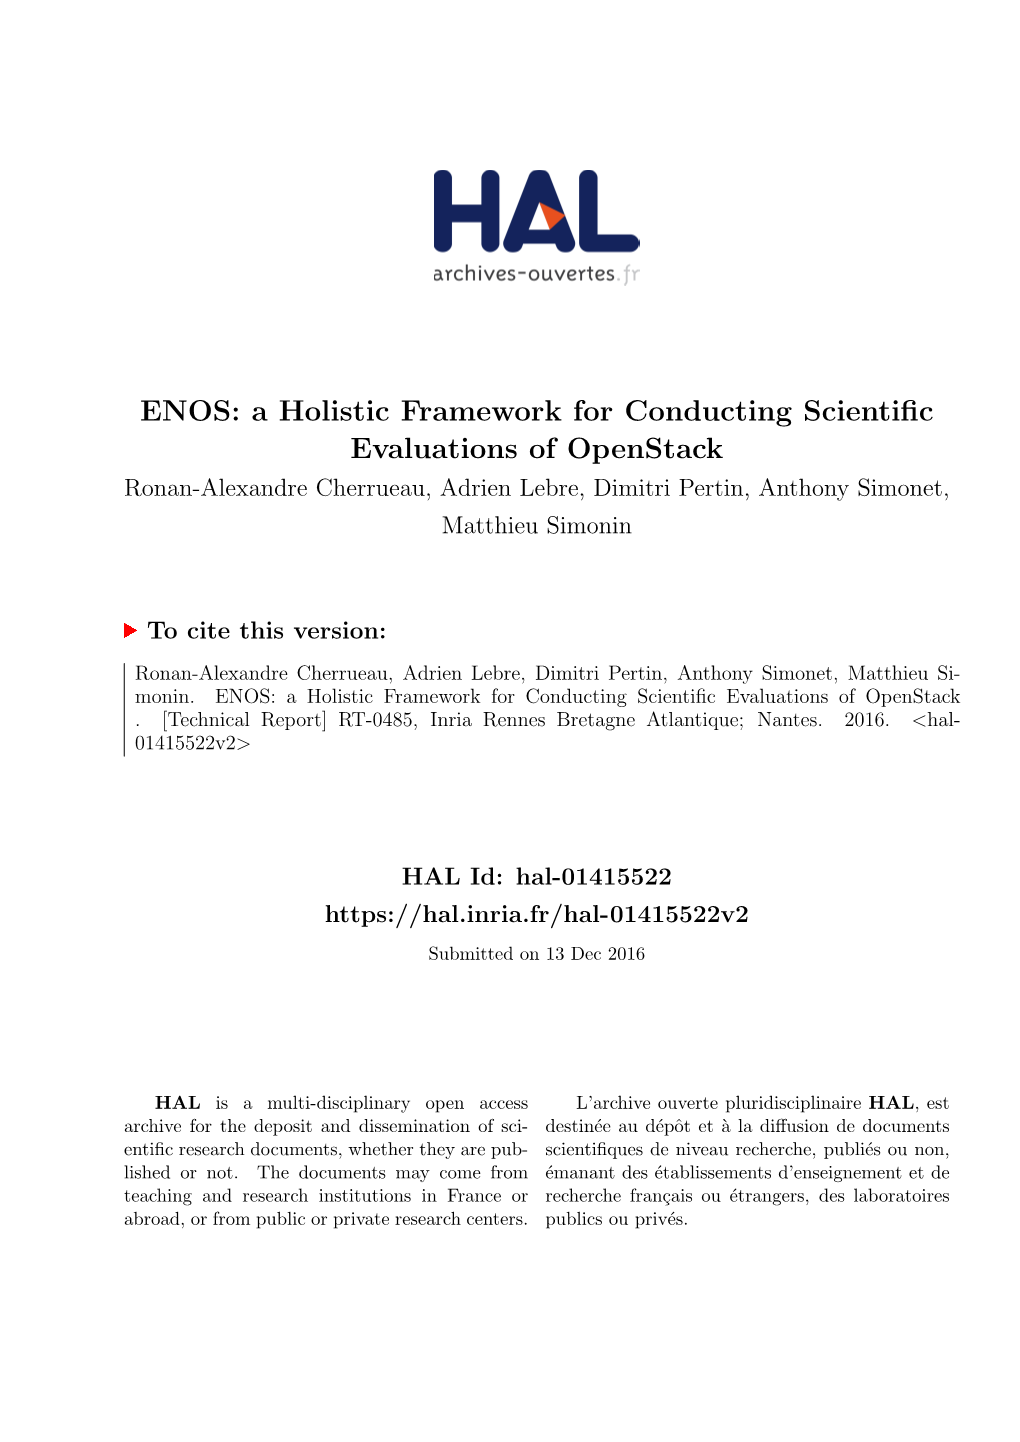 ENOS: a Holistic Framework for Conducting Scientific Evaluations Of